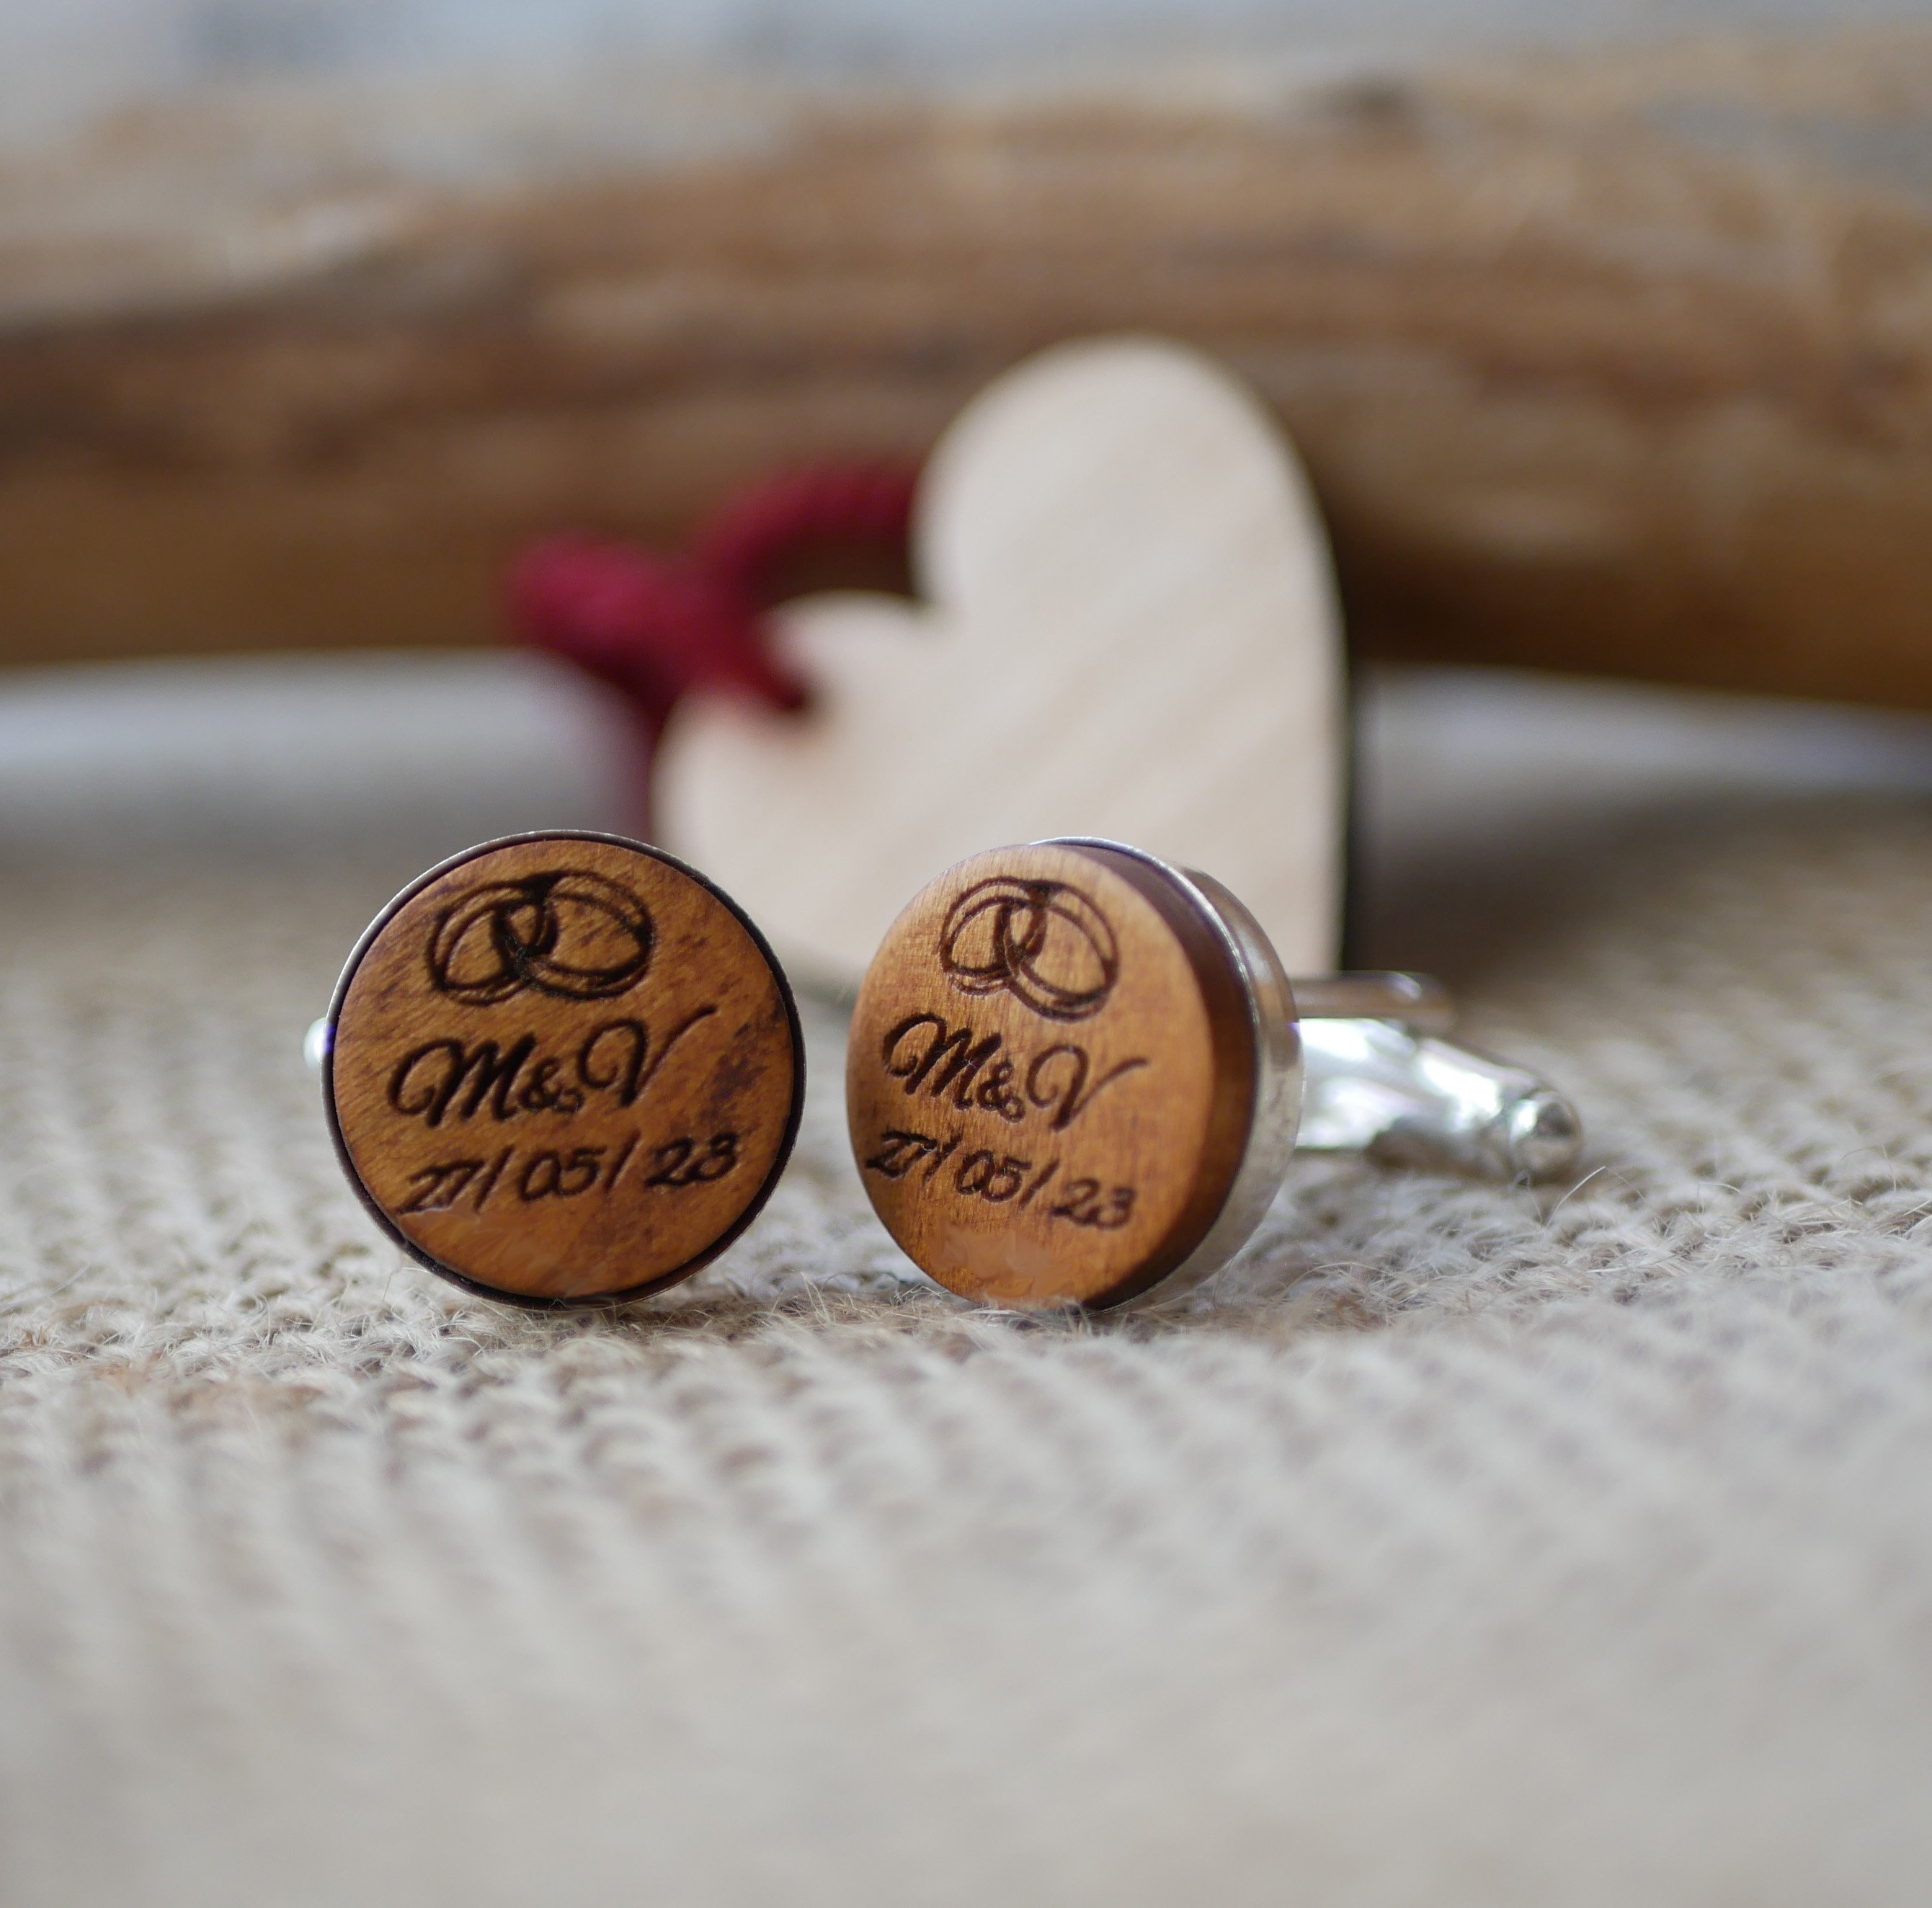 Cufflinks set in silver engraved wood 4 sizes to choose from